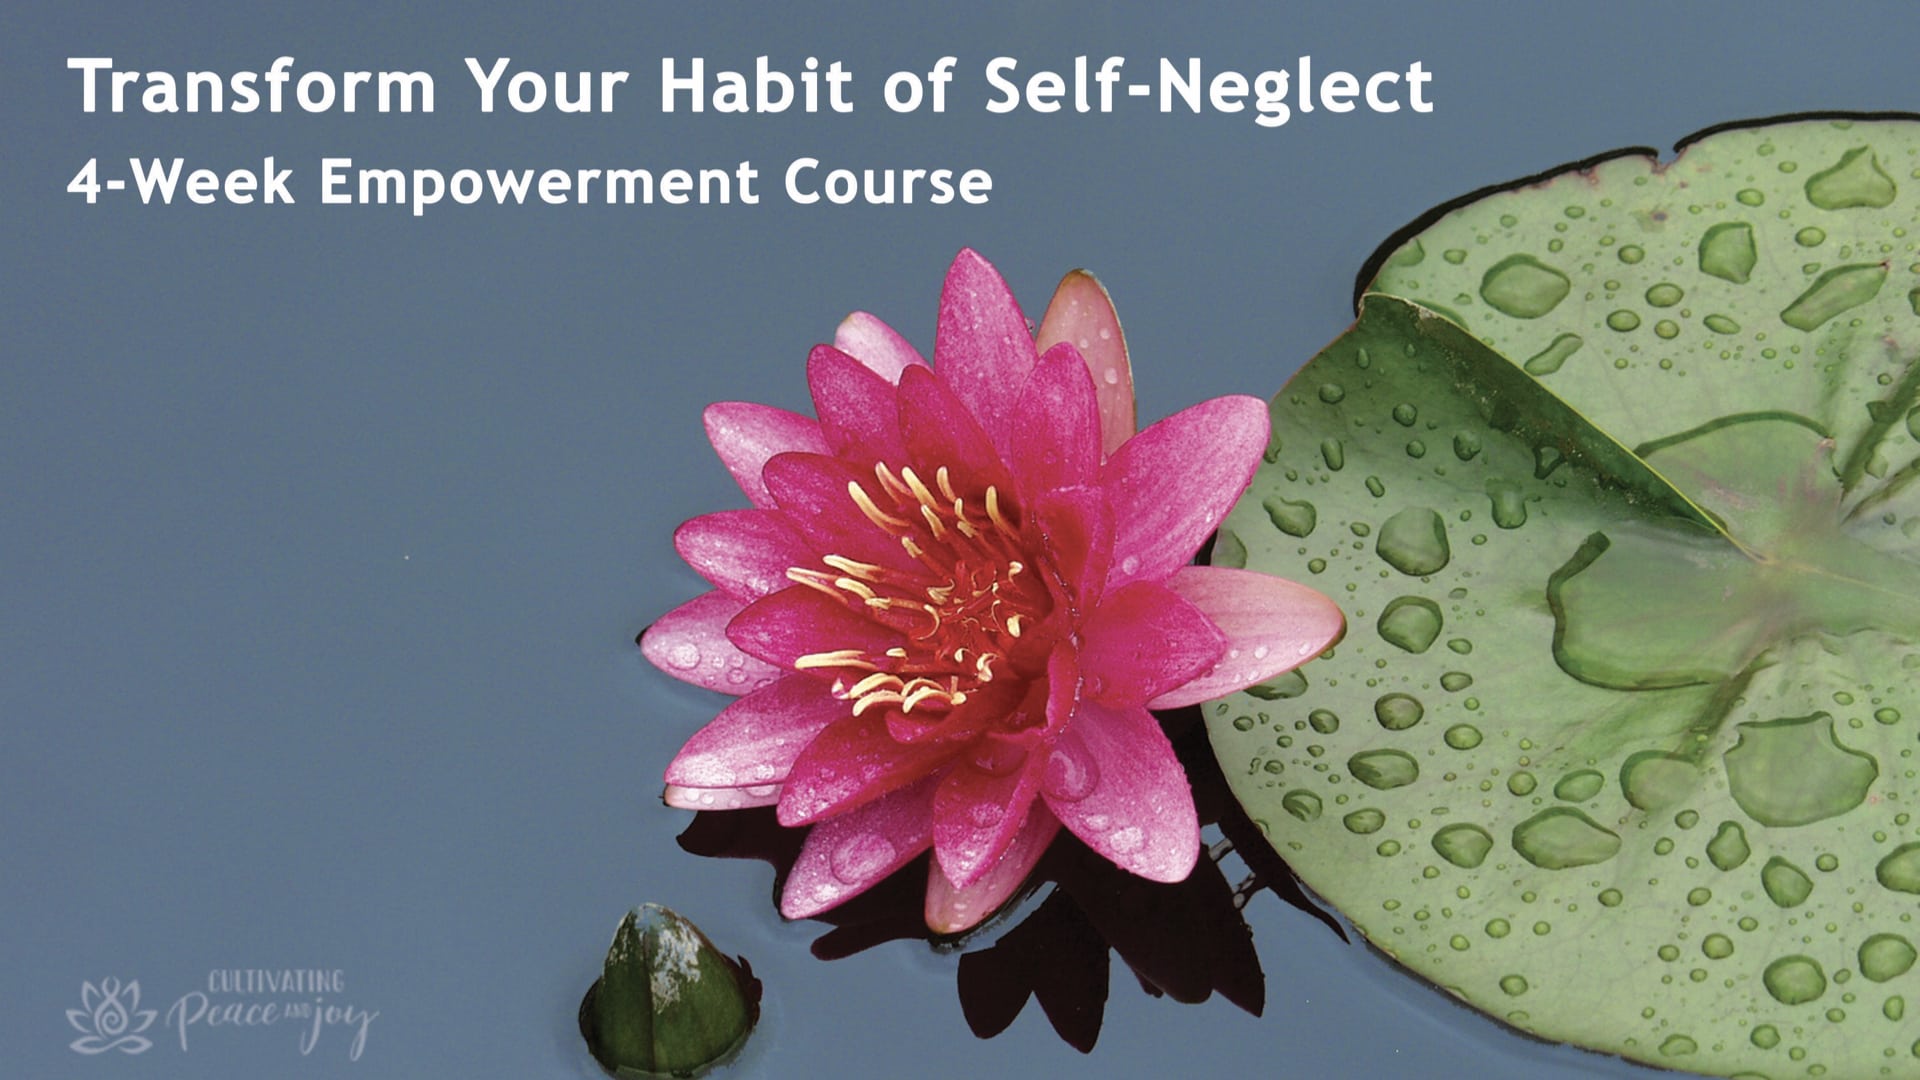 Transform Your Habit of Self-Neglect eCourse by Kelley Grimes of Cultivating Peace and Joy